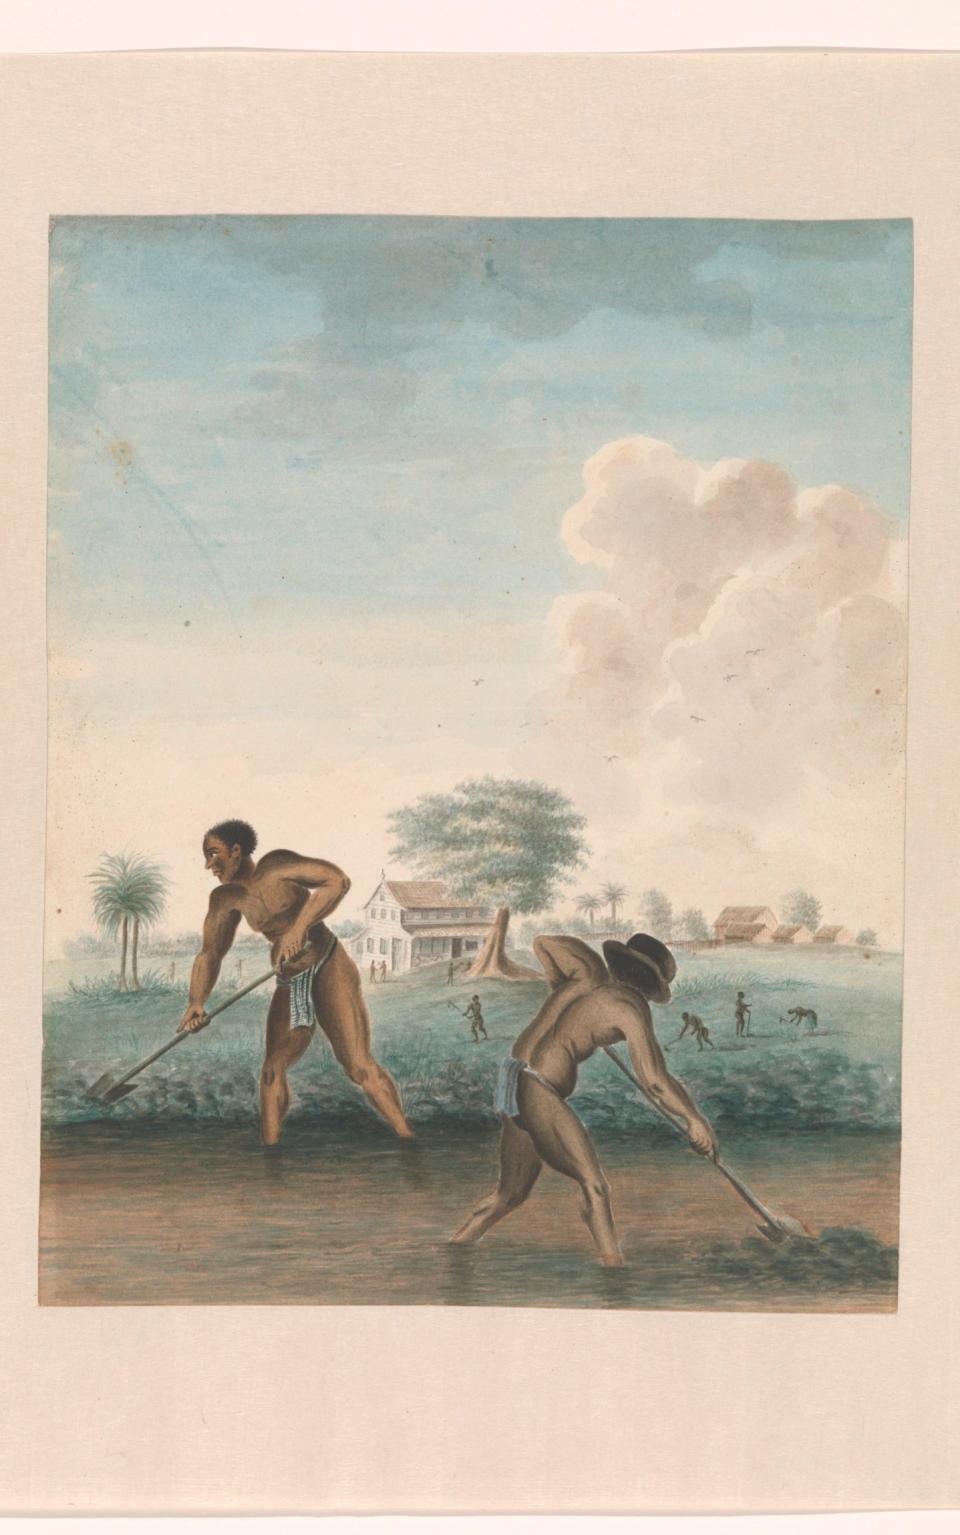 Enslaved men working on the fields in an 1850 paining by an unknown artist